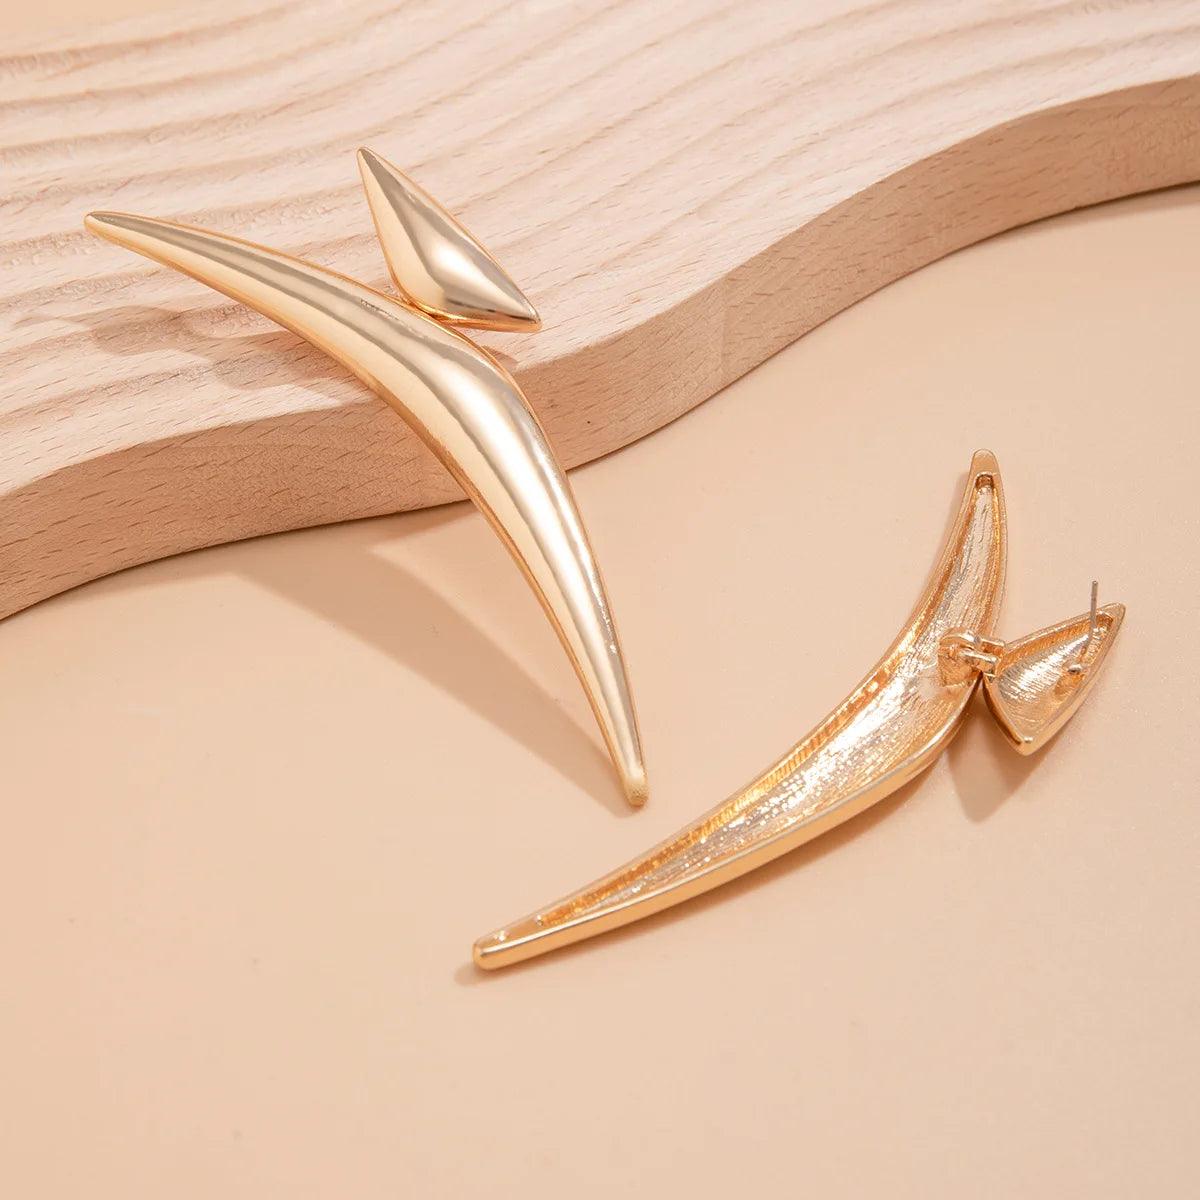 Andy Triangle Pointed Earrings - Virago Wear - Accessories, Earrings, New arrivals - Accessories